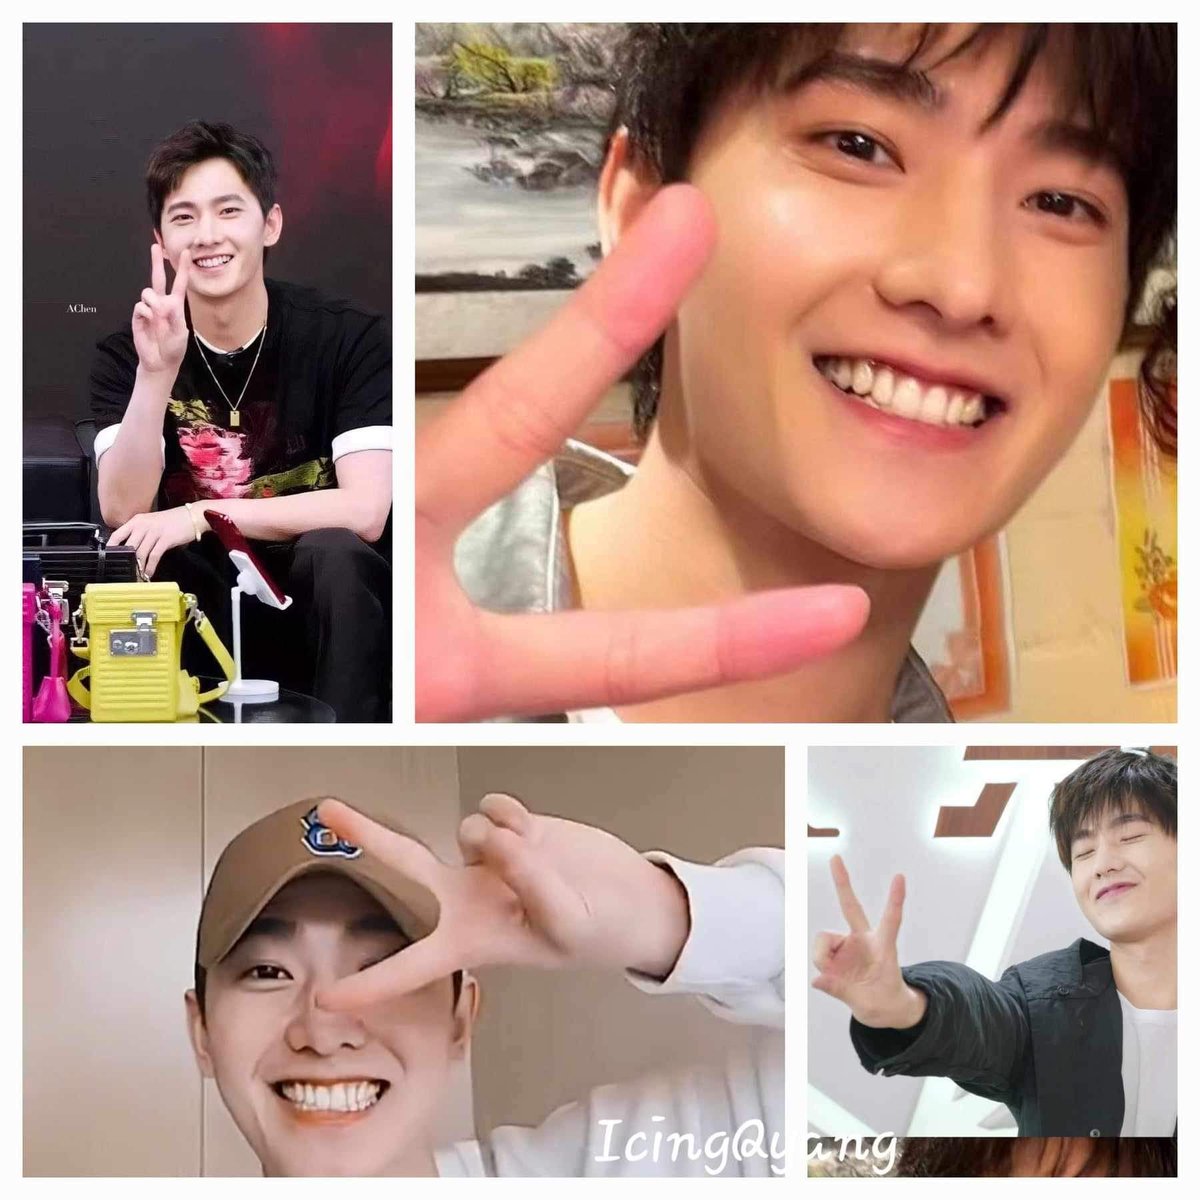 #YangYang杨洋 your #alluringsmile brightens up any dreary day. And the peace sign calms the most frayed nerves. #youlightupmylife